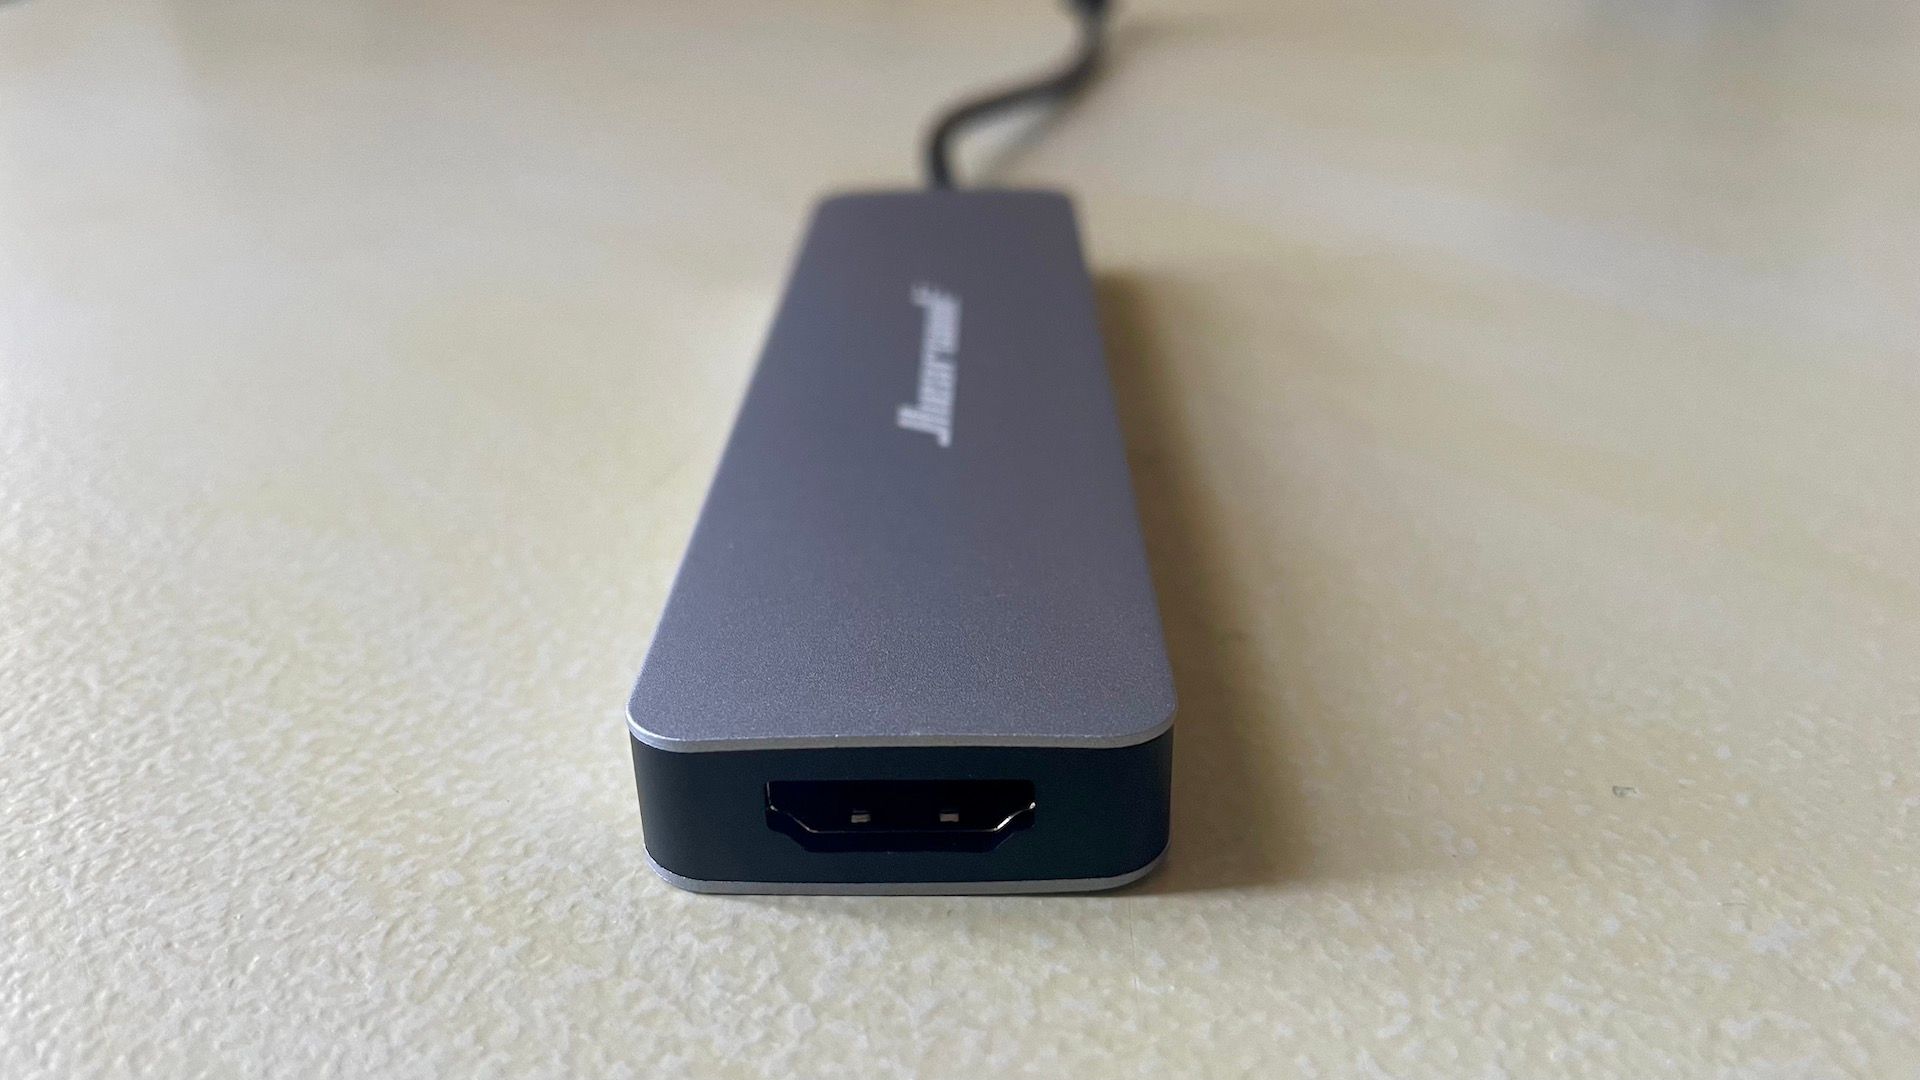 The HDMI port on the Hiearcool USB-C adapter.